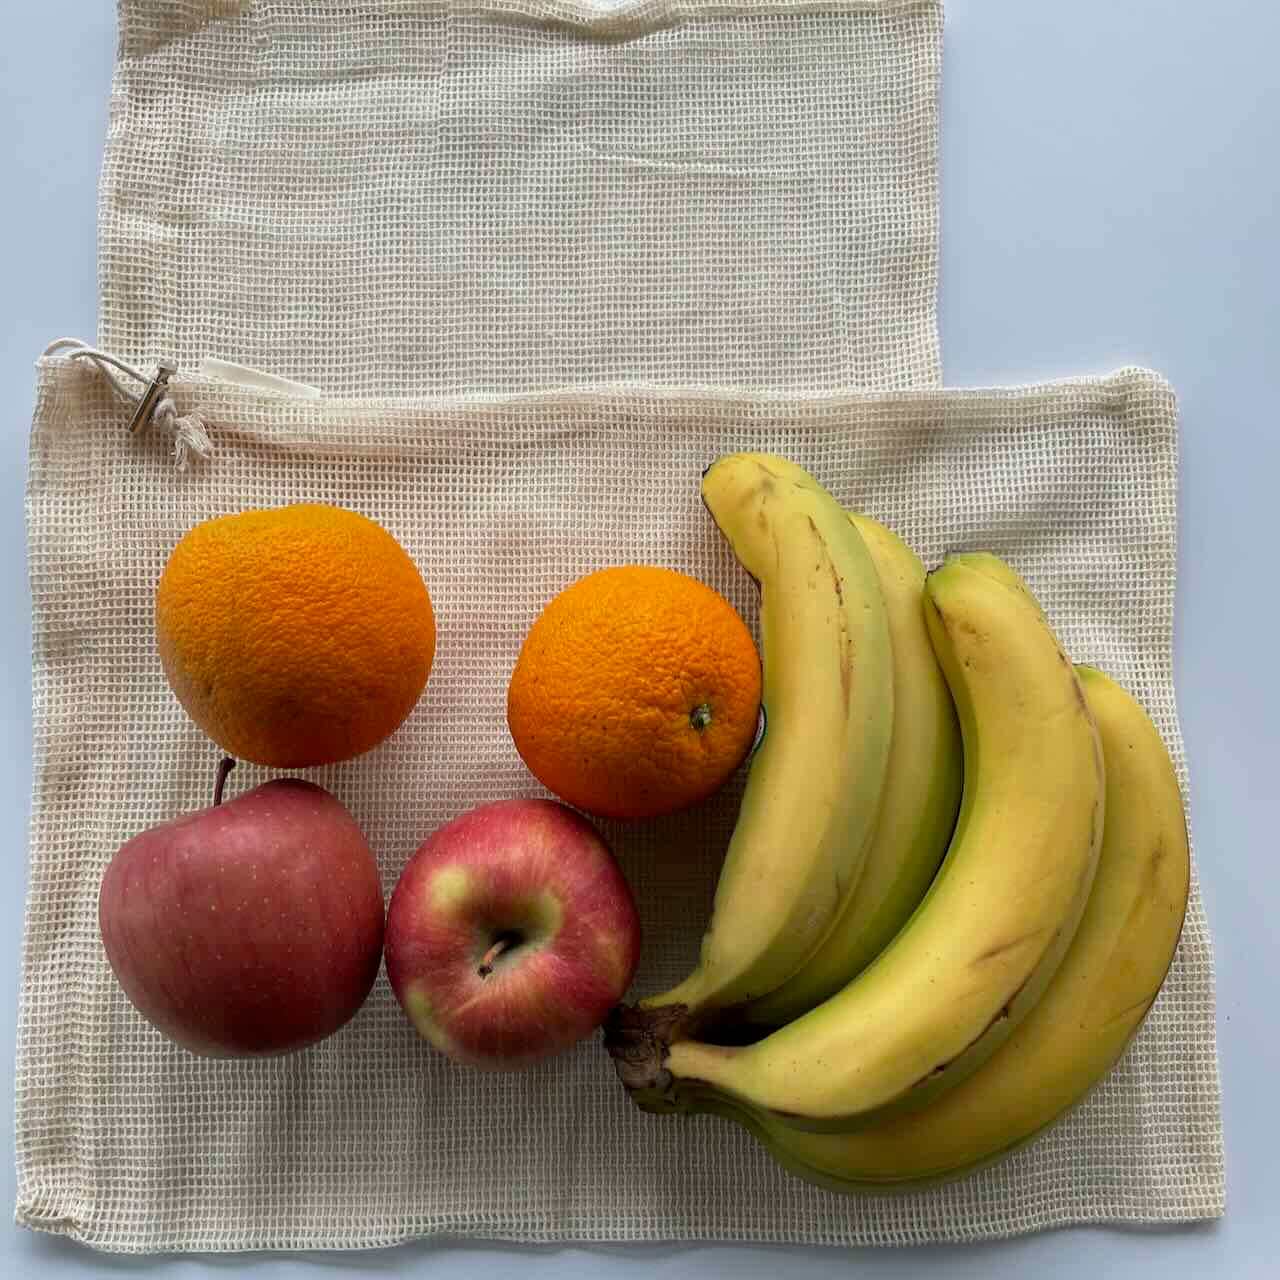 a bunch of bananas, two large oranges and two large apples on top of a large mesh bag,